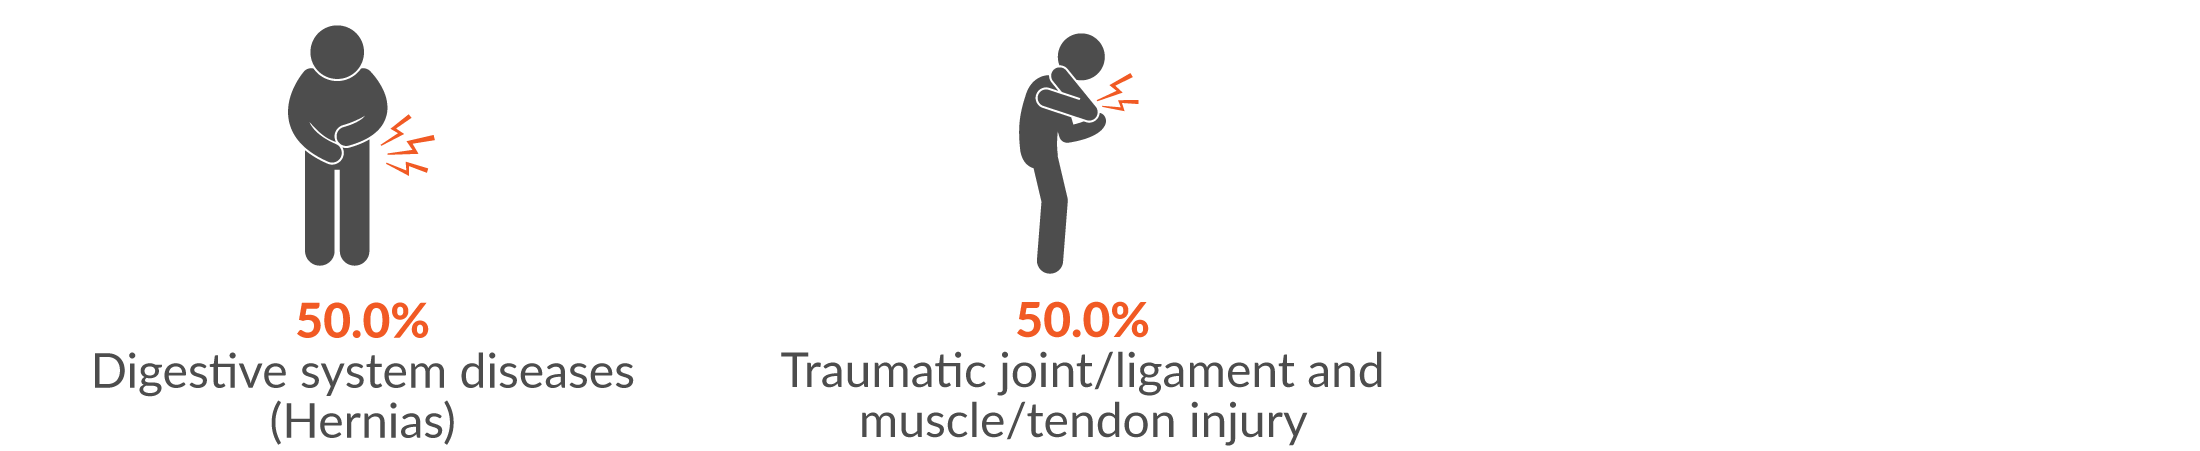 50.0% digestive system diseases (hernias); and 50.0% traumatic joint/ligament and muscle/tendon injury.